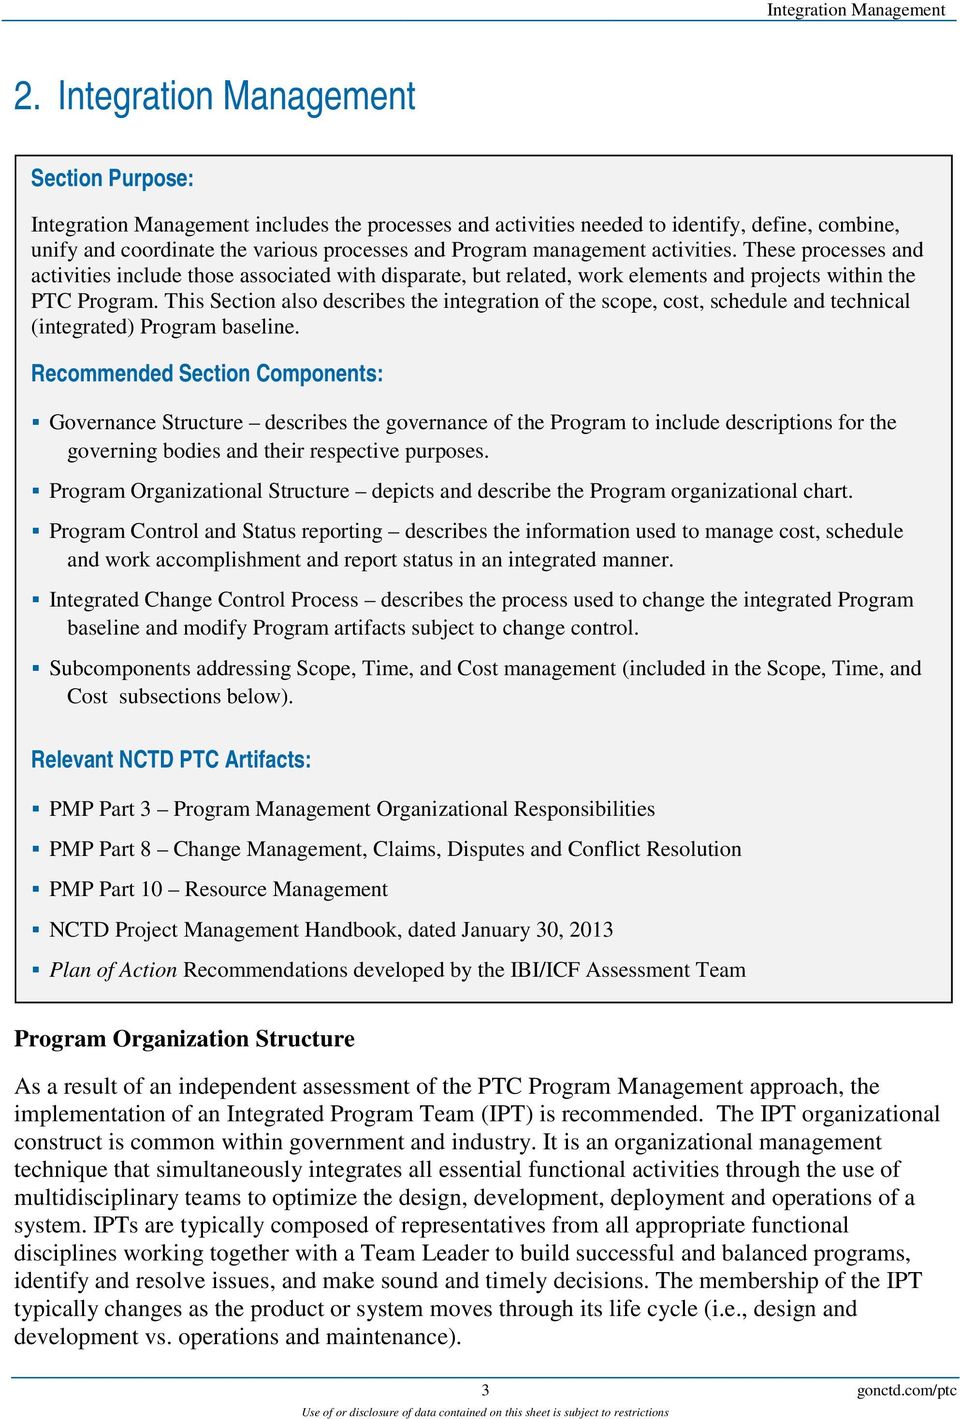 management activities. These processes and activities include those associated with disparate, but related, work elements and projects within the PTC Program.